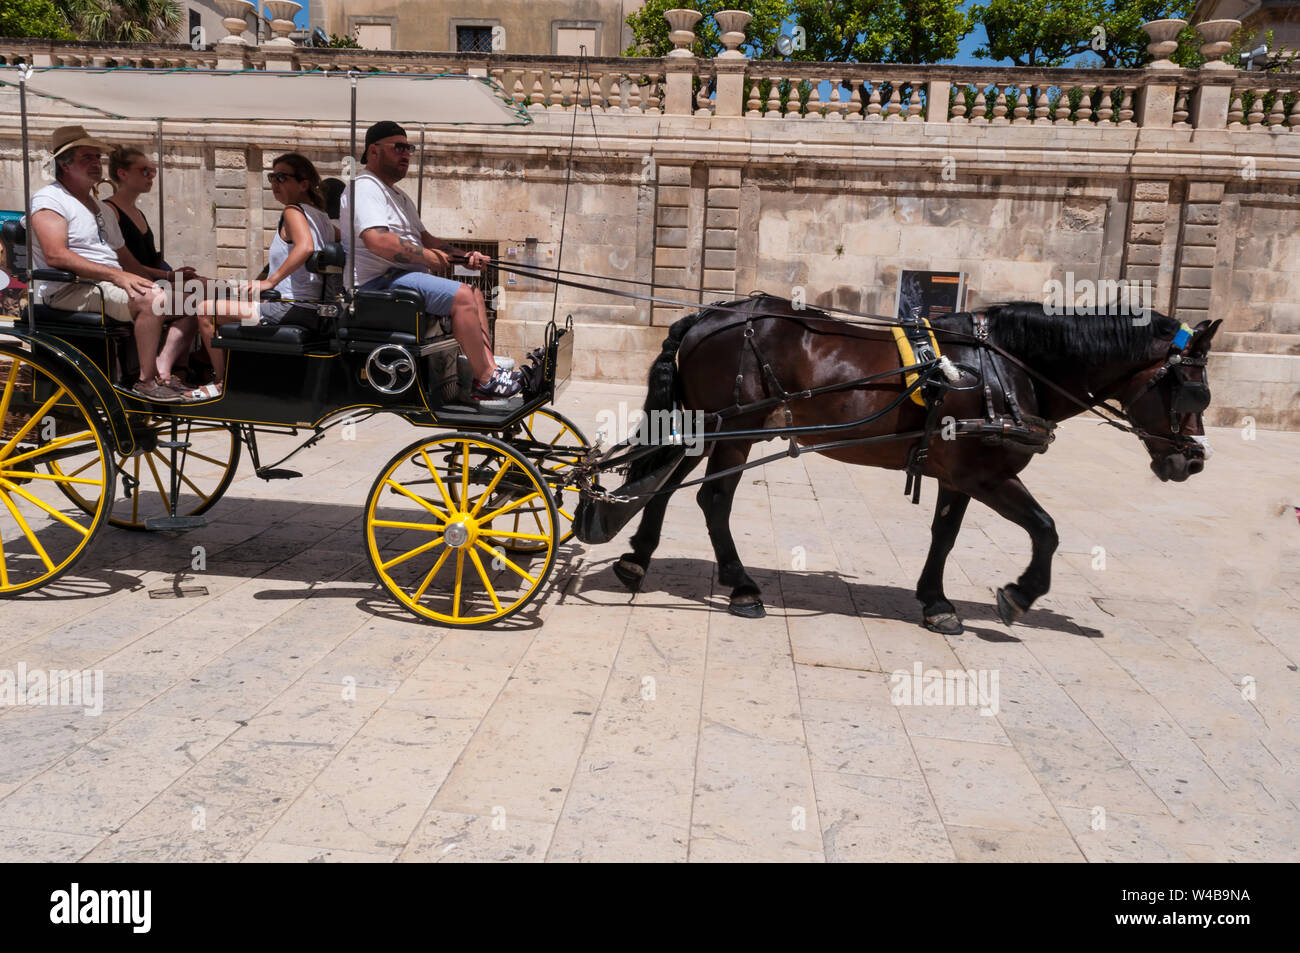 Visitors in a horse carriage shielded from the sun in the historic district of Ortegia, Siracusa, Sicily, Italy Stock Photo